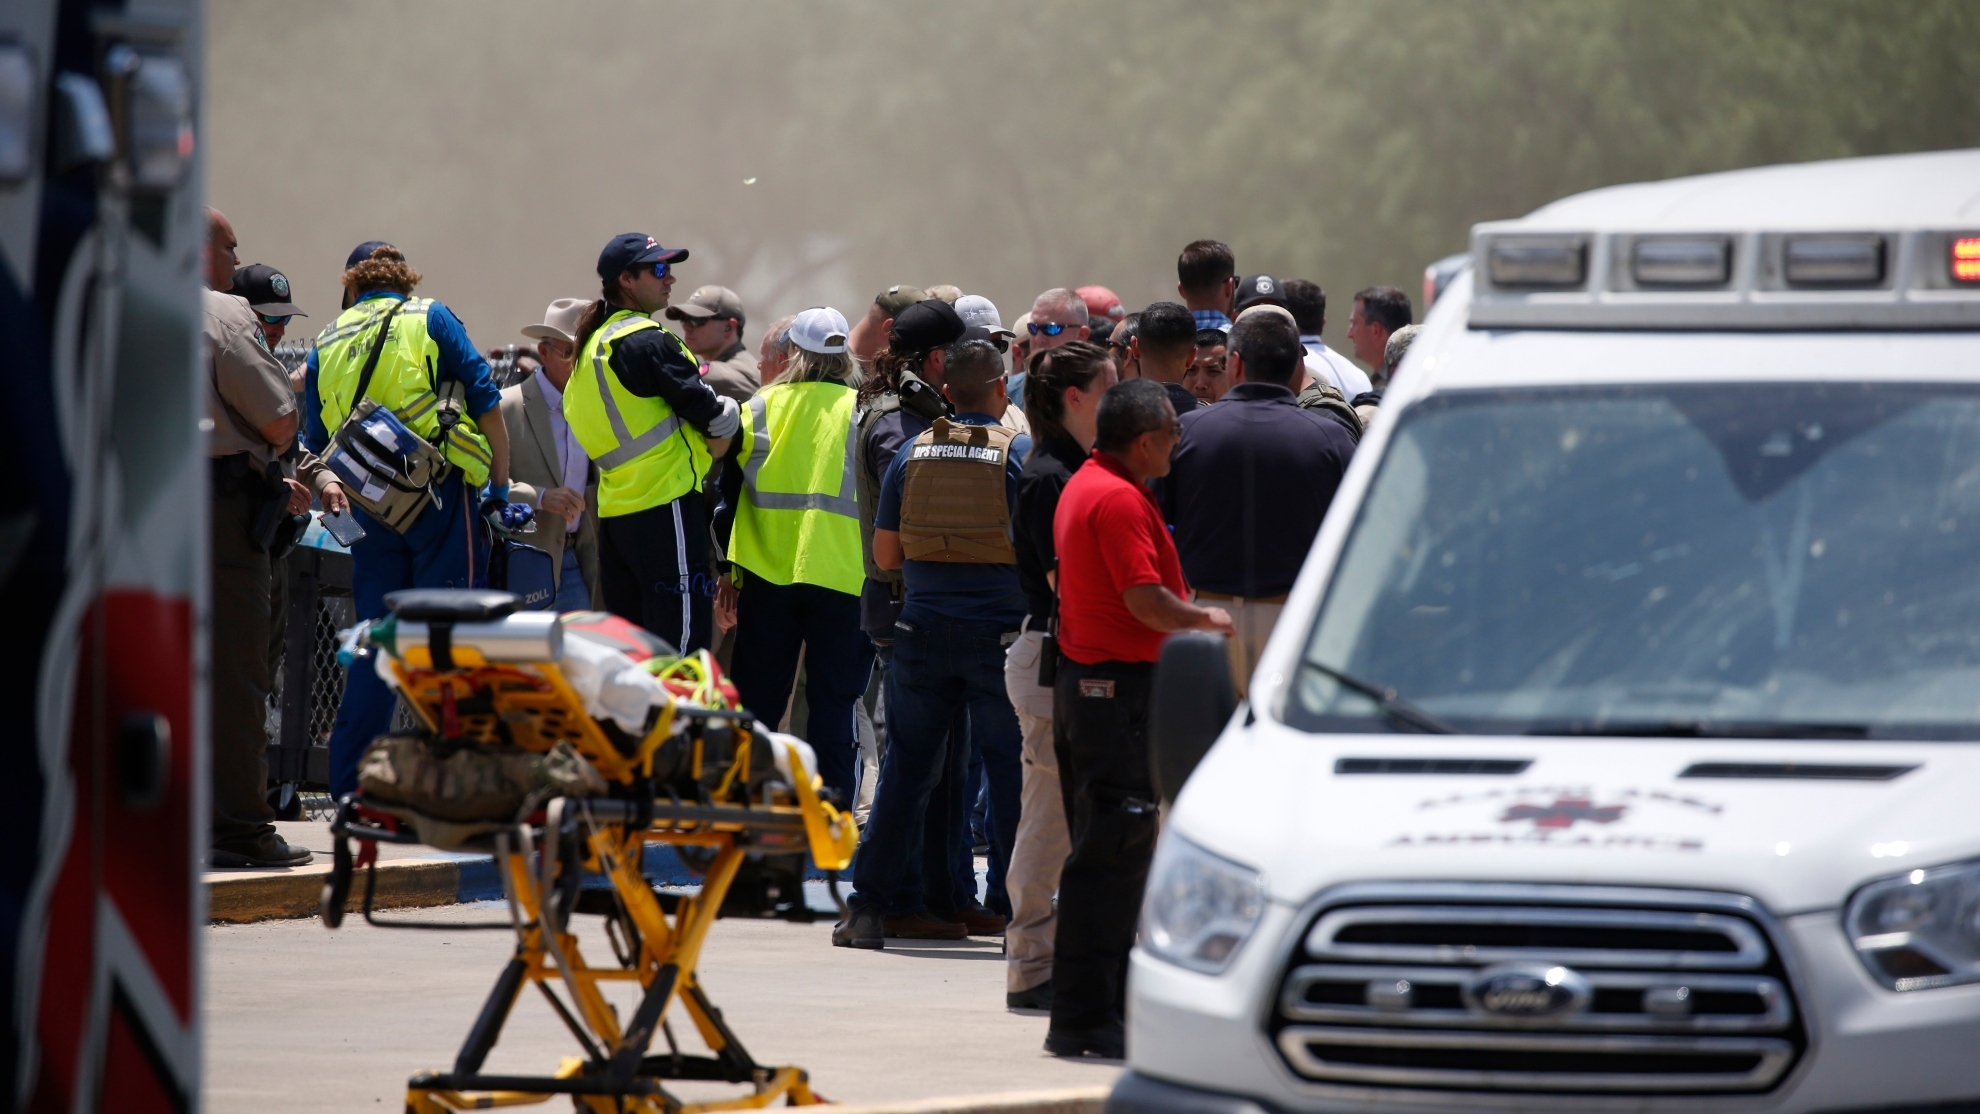 School shooting in Texas leaves 18 dead children and 3 adults, per reports  | Marca